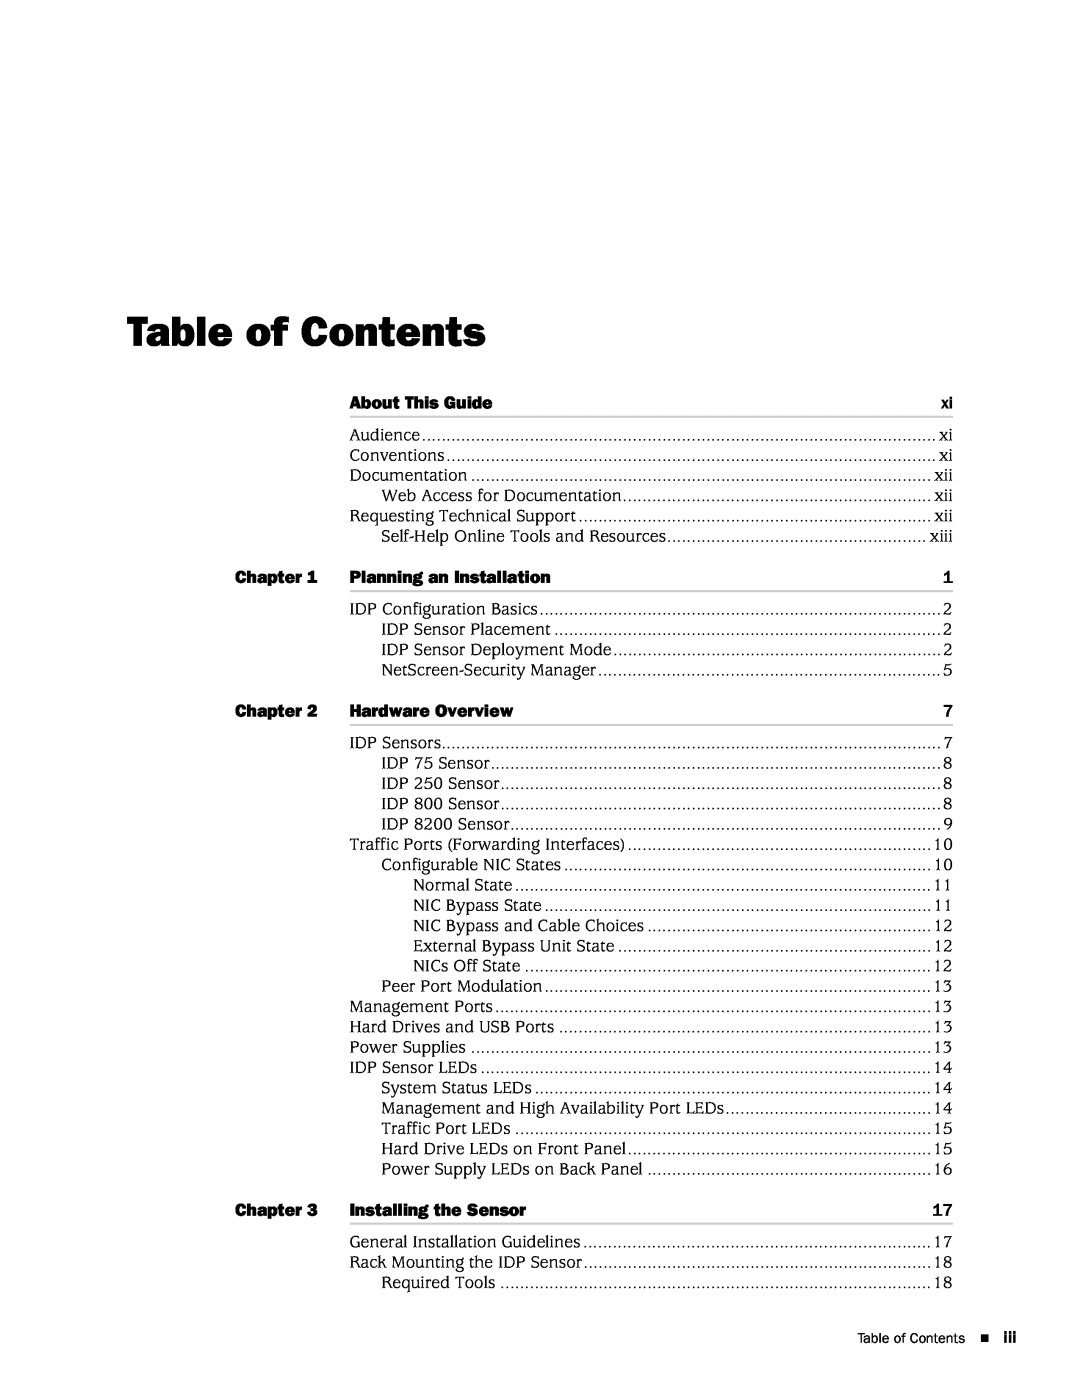 Juniper Networks IDP75, IDP250 Table of Contents, About This Guide, Chapter, Planning an Installation, Hardware Overview 